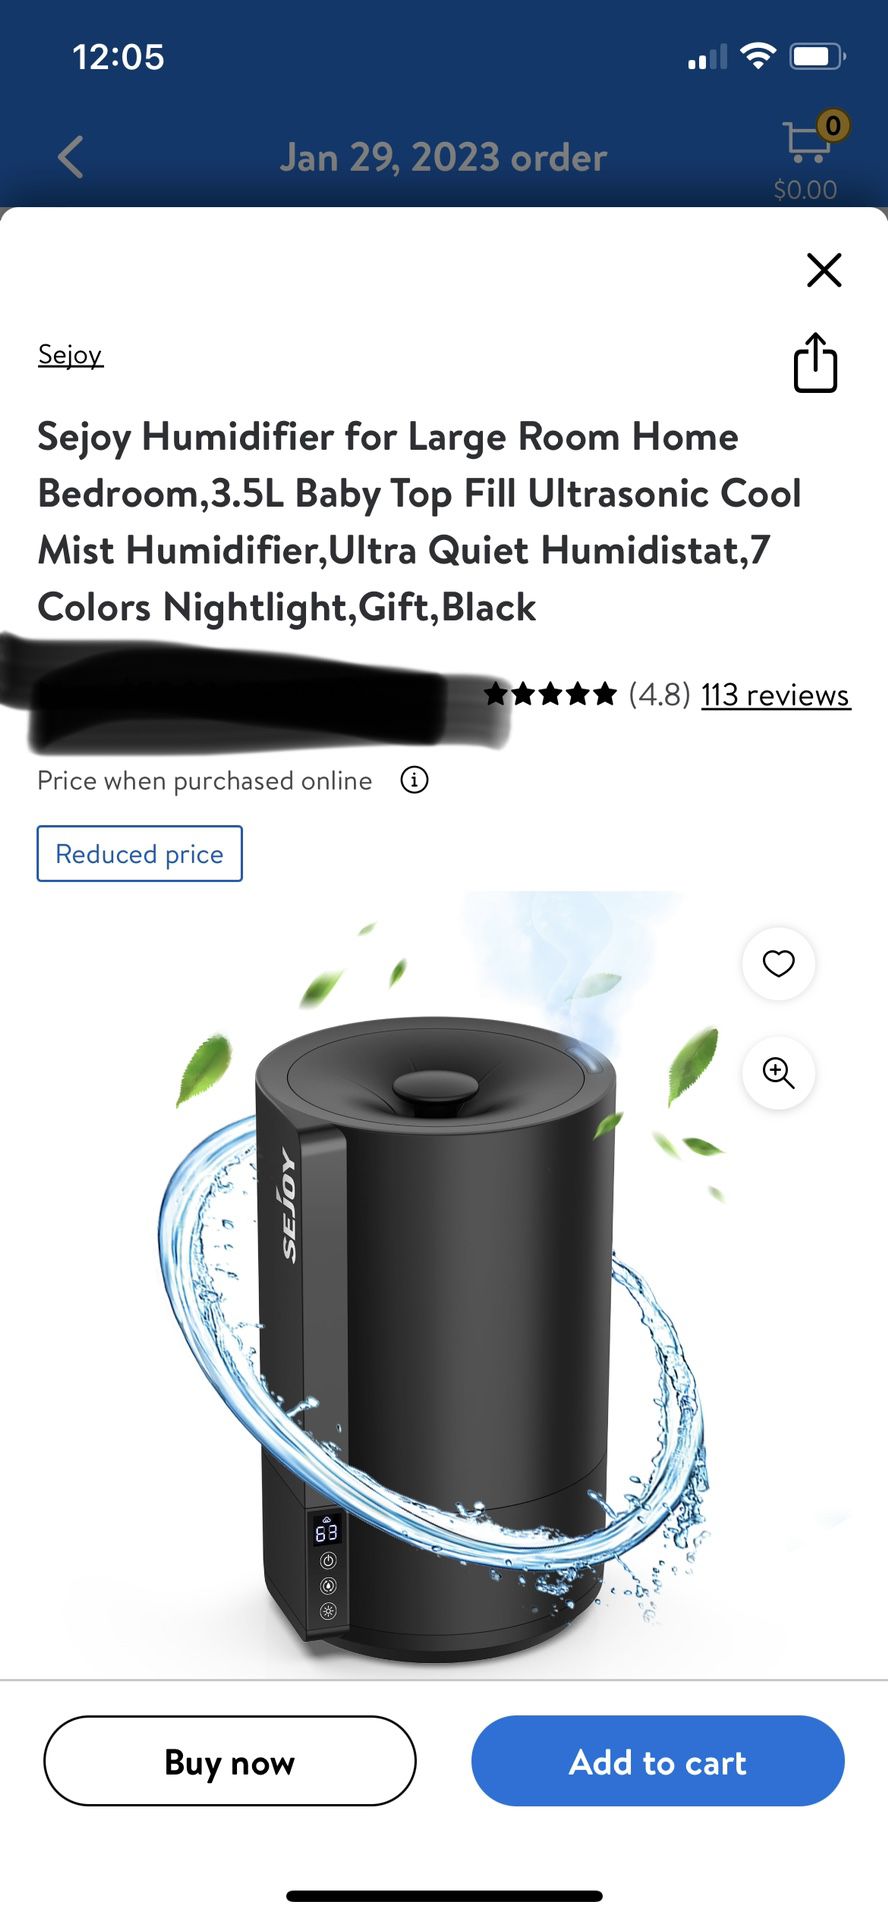 Humidifier- Never Opened